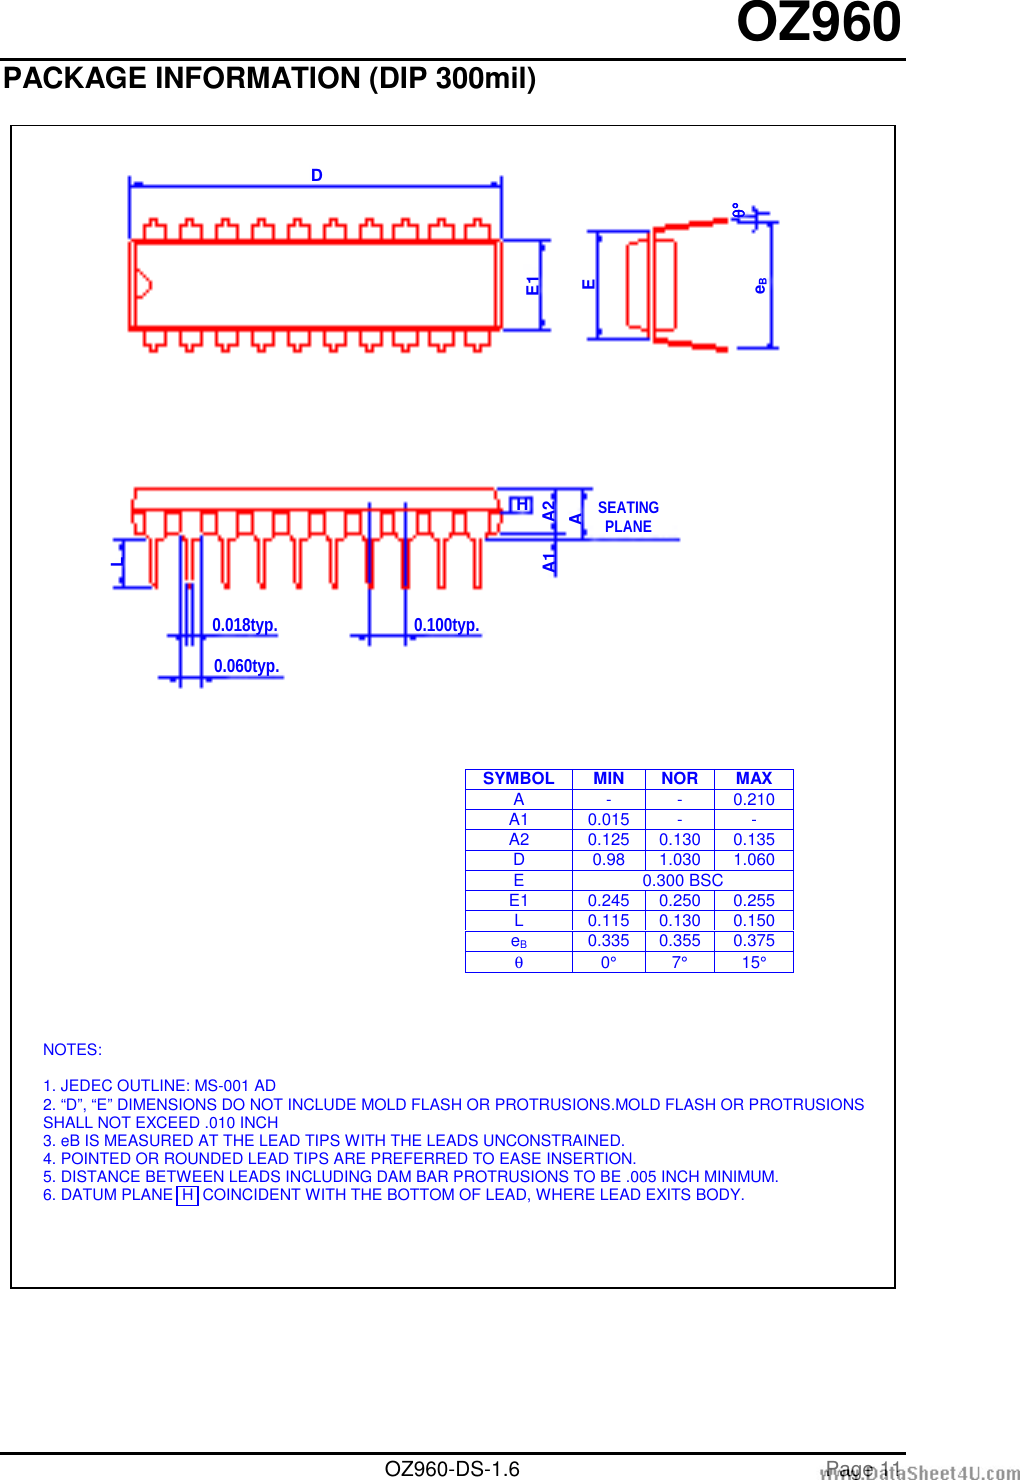 Page 11 of 12 - CCFL Backlight Controller 2008129131956425